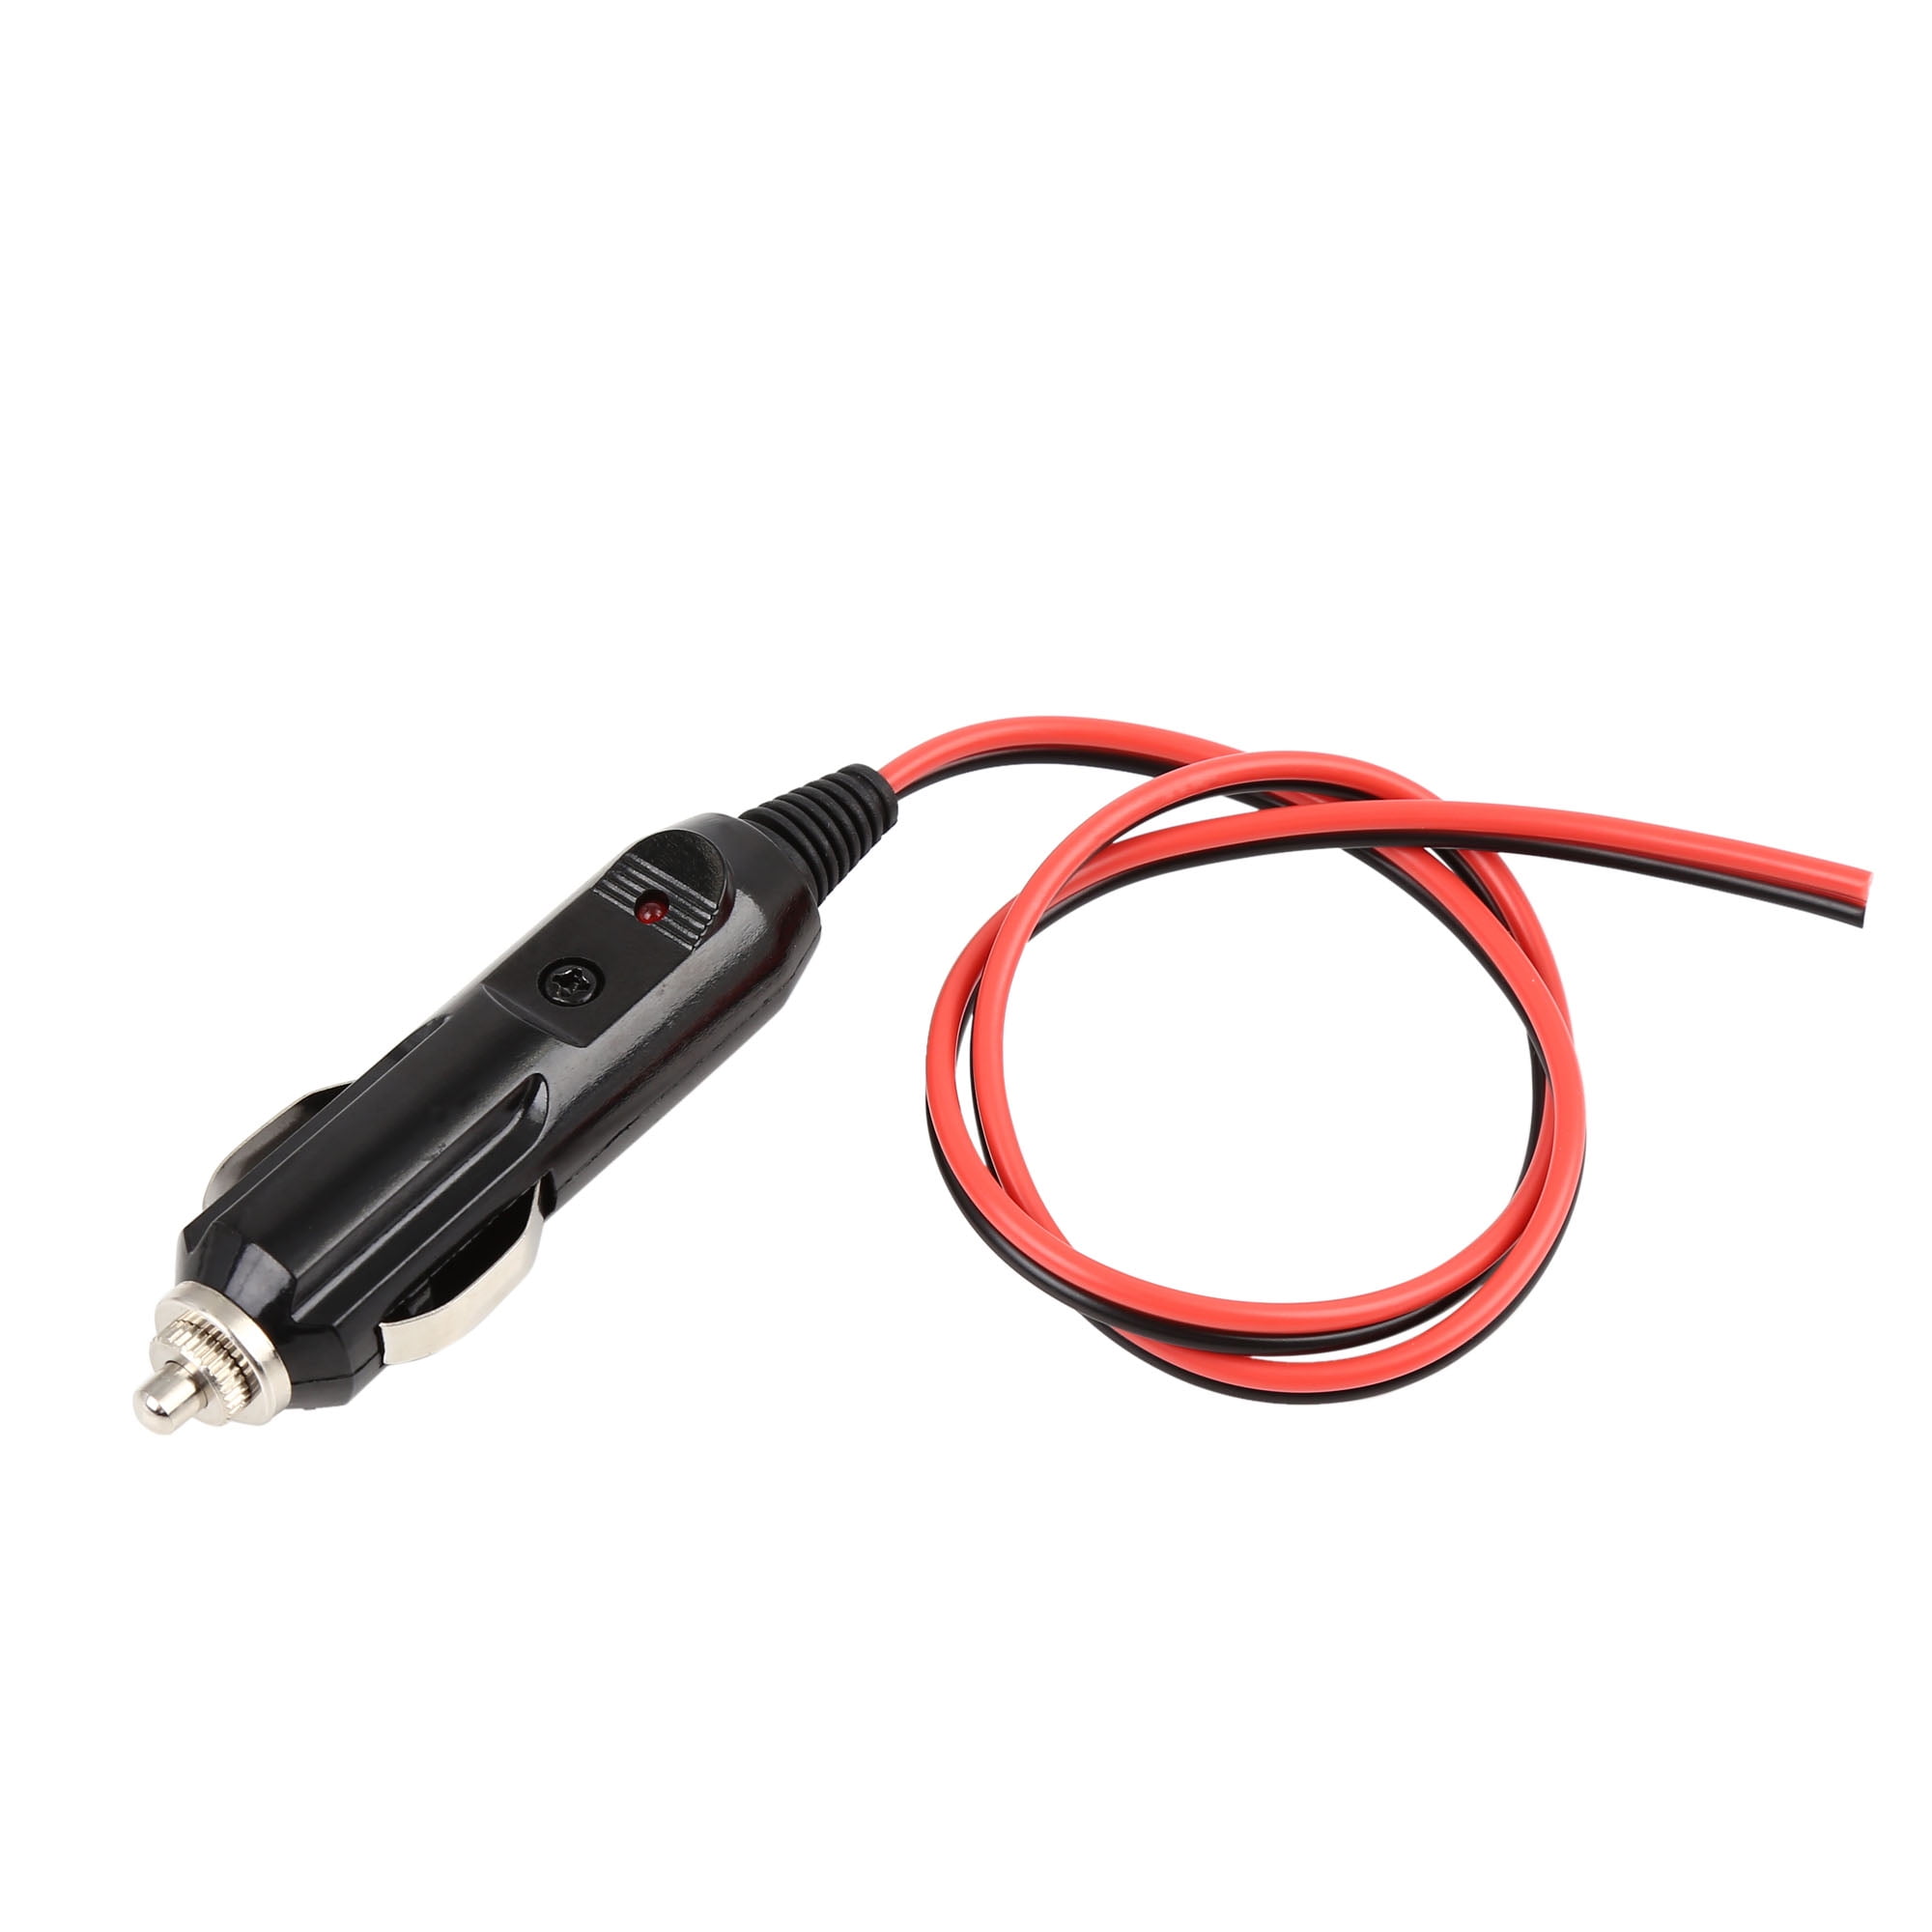 DC 12V 24V Male Plug Cigarette Lighter Adapter Cord with 1.5 Feet Cable  Wire For Car Inverter